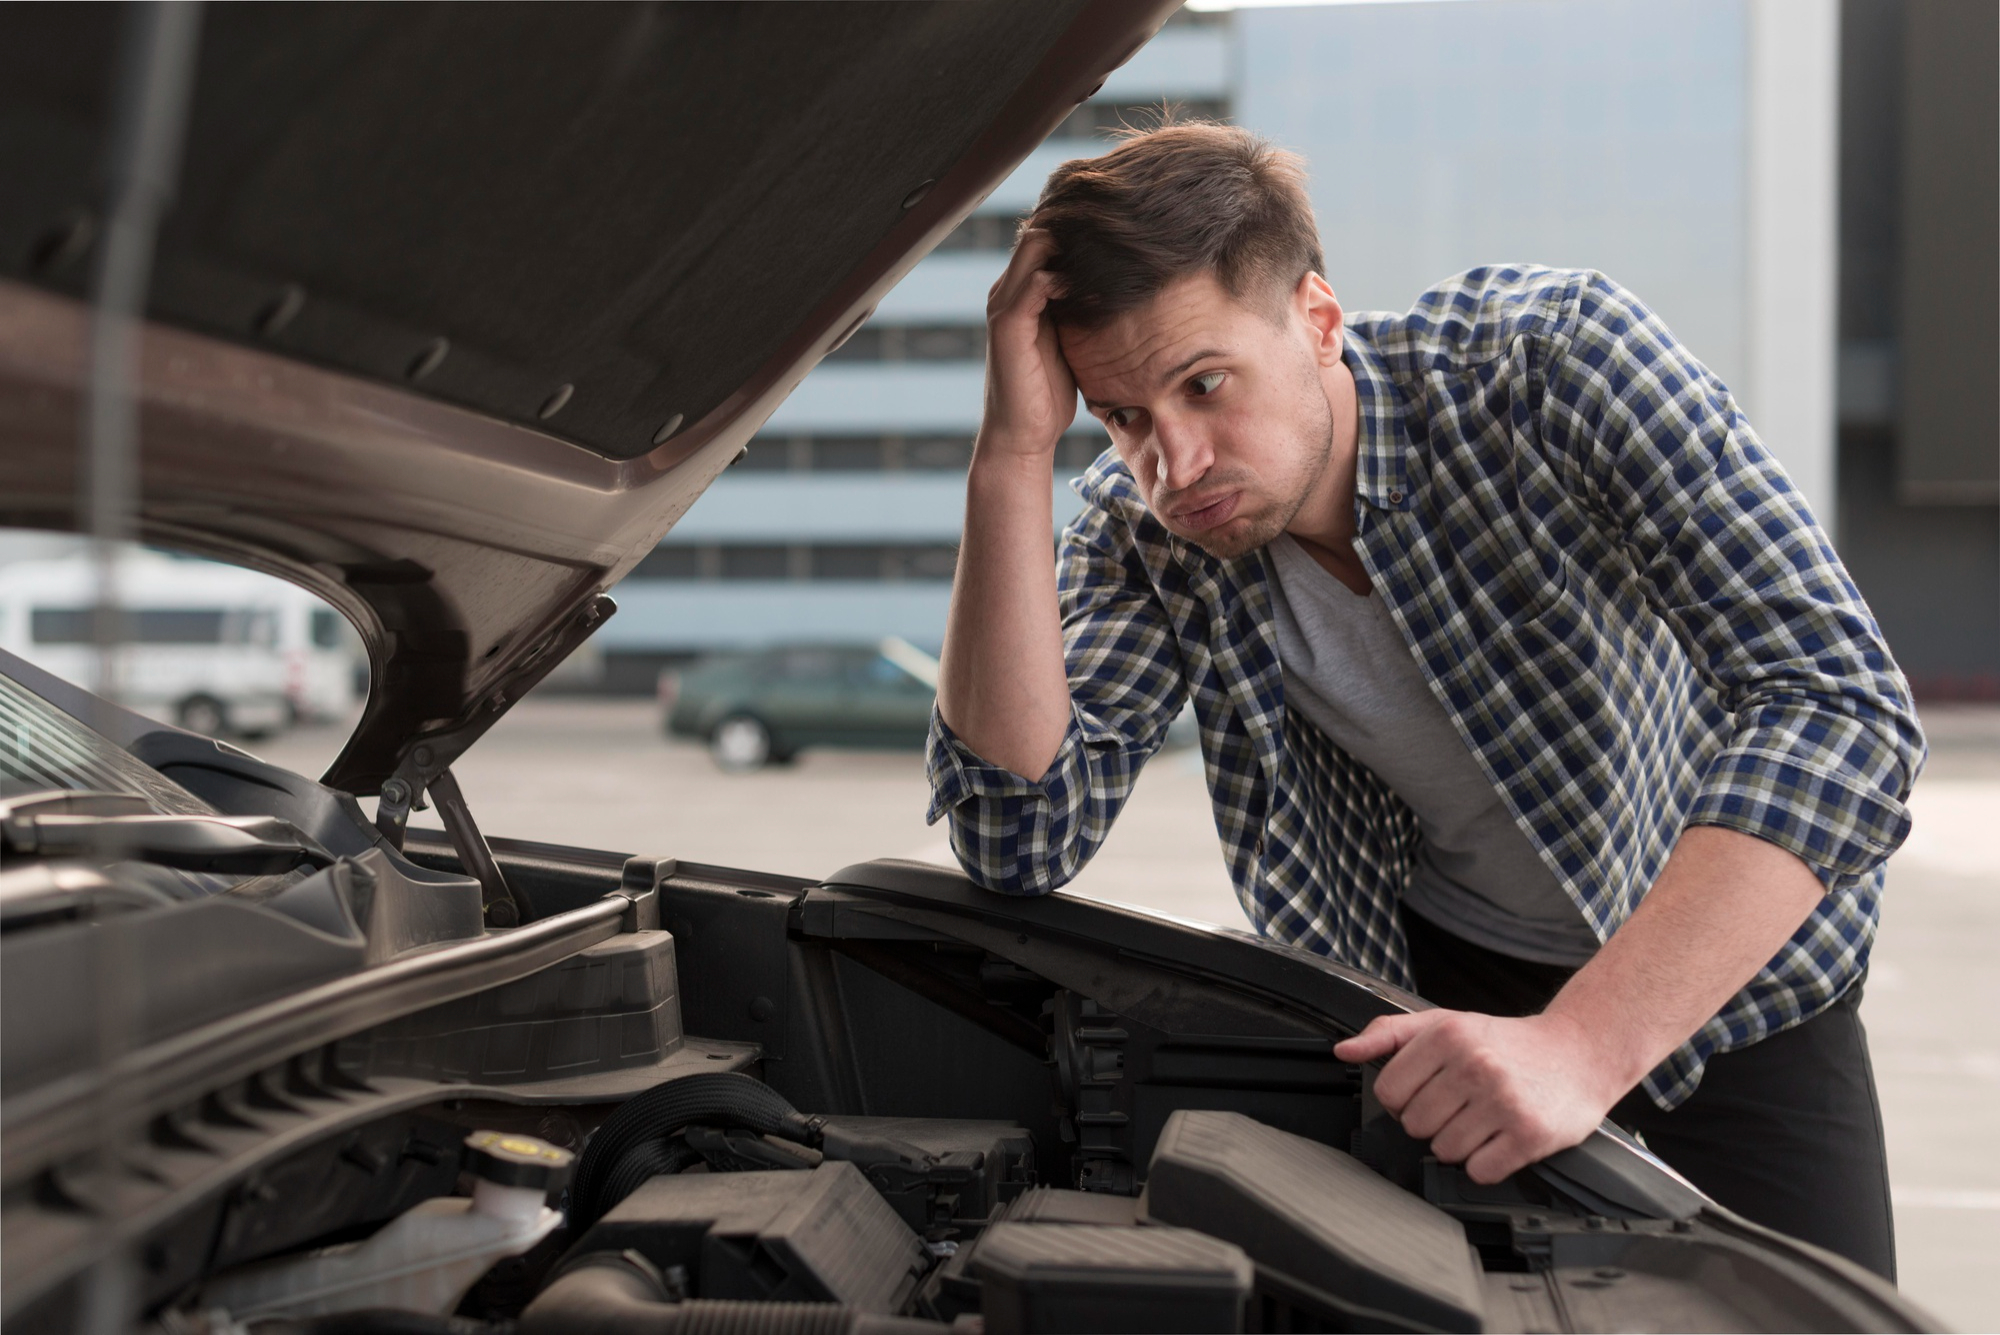 A frustrated man with car troubles | Source: Freepik